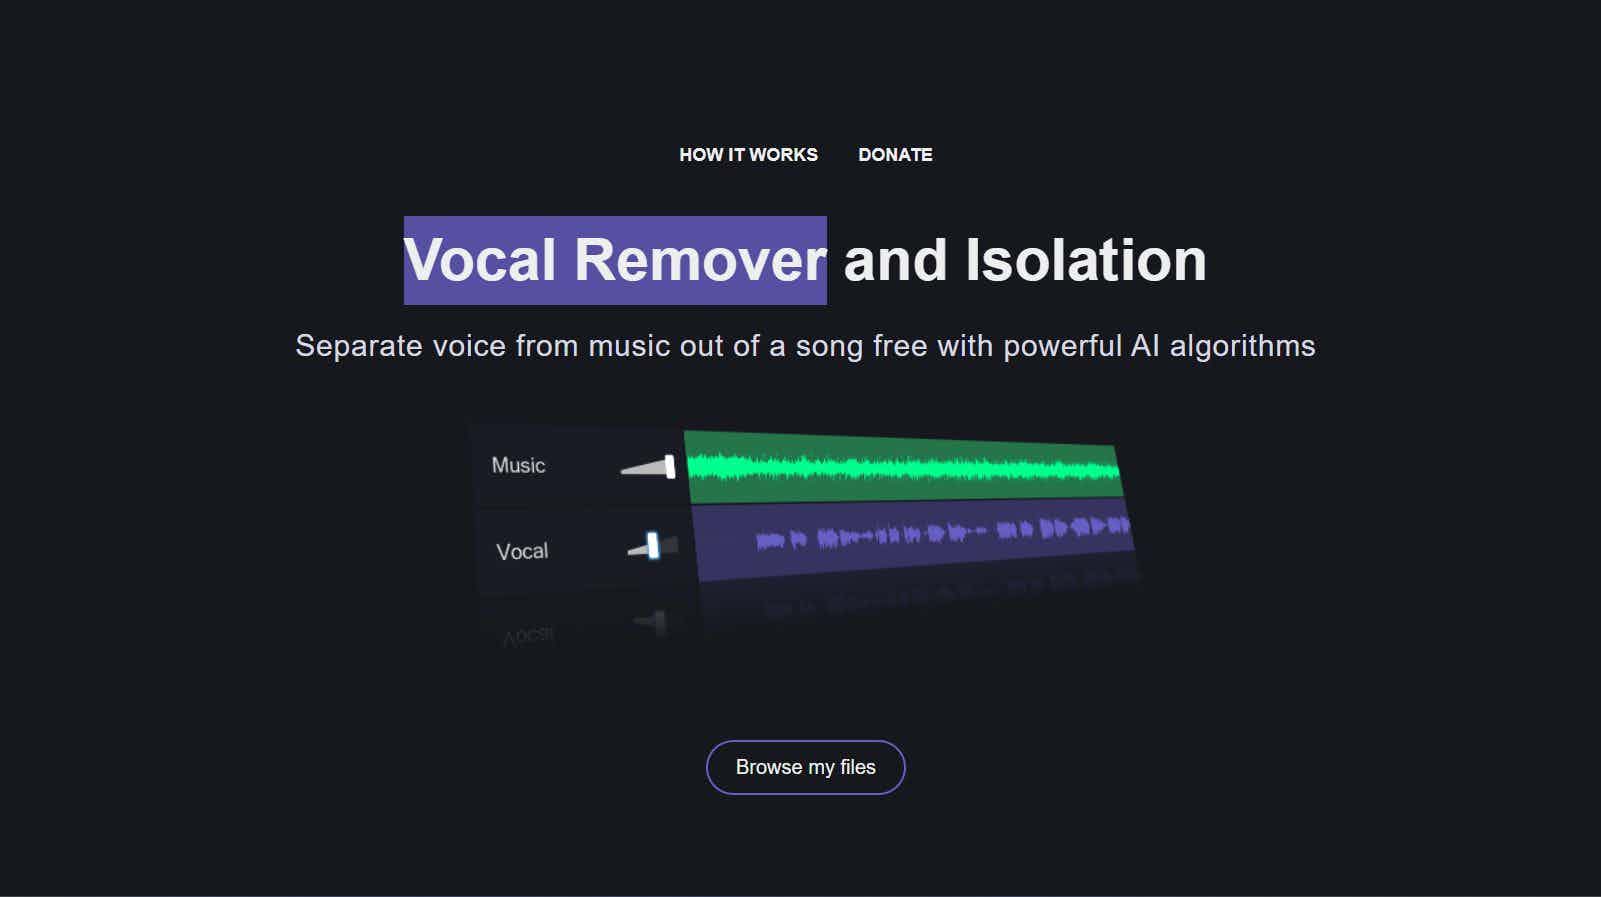 Vocal Remover and Isolation